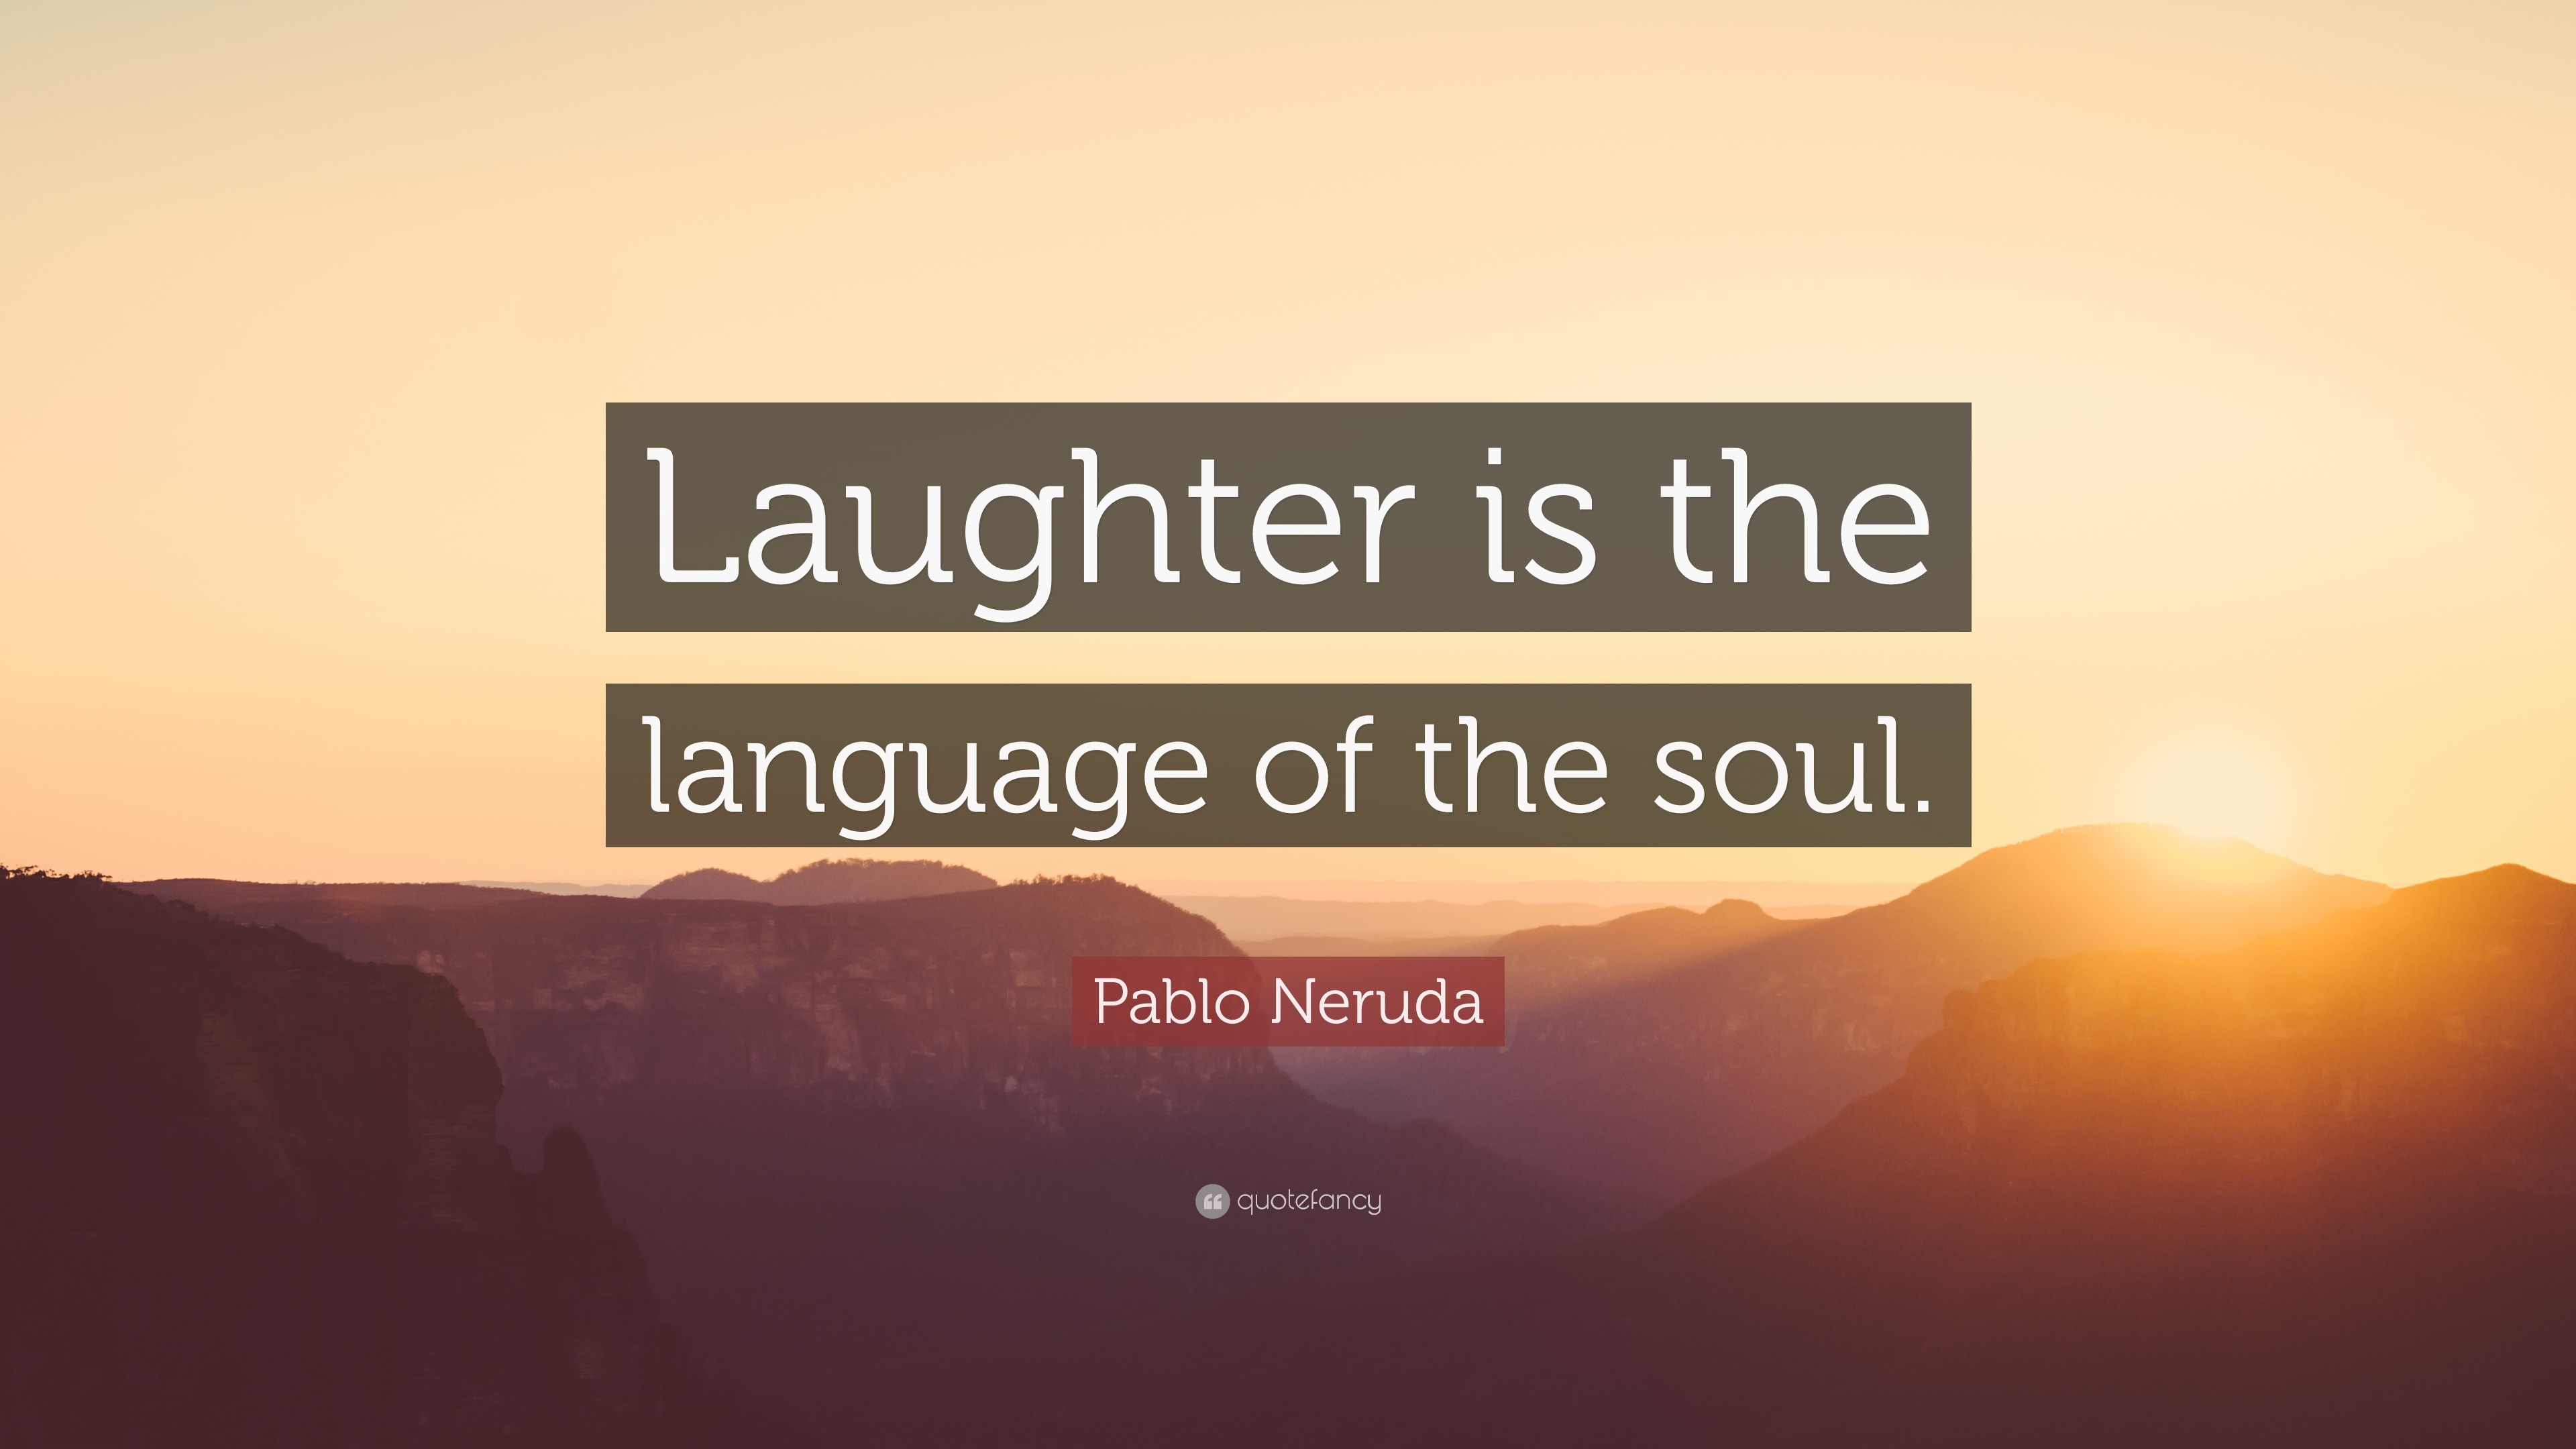 Quotes About Laughing (40 wallpapers) - Quotefancy